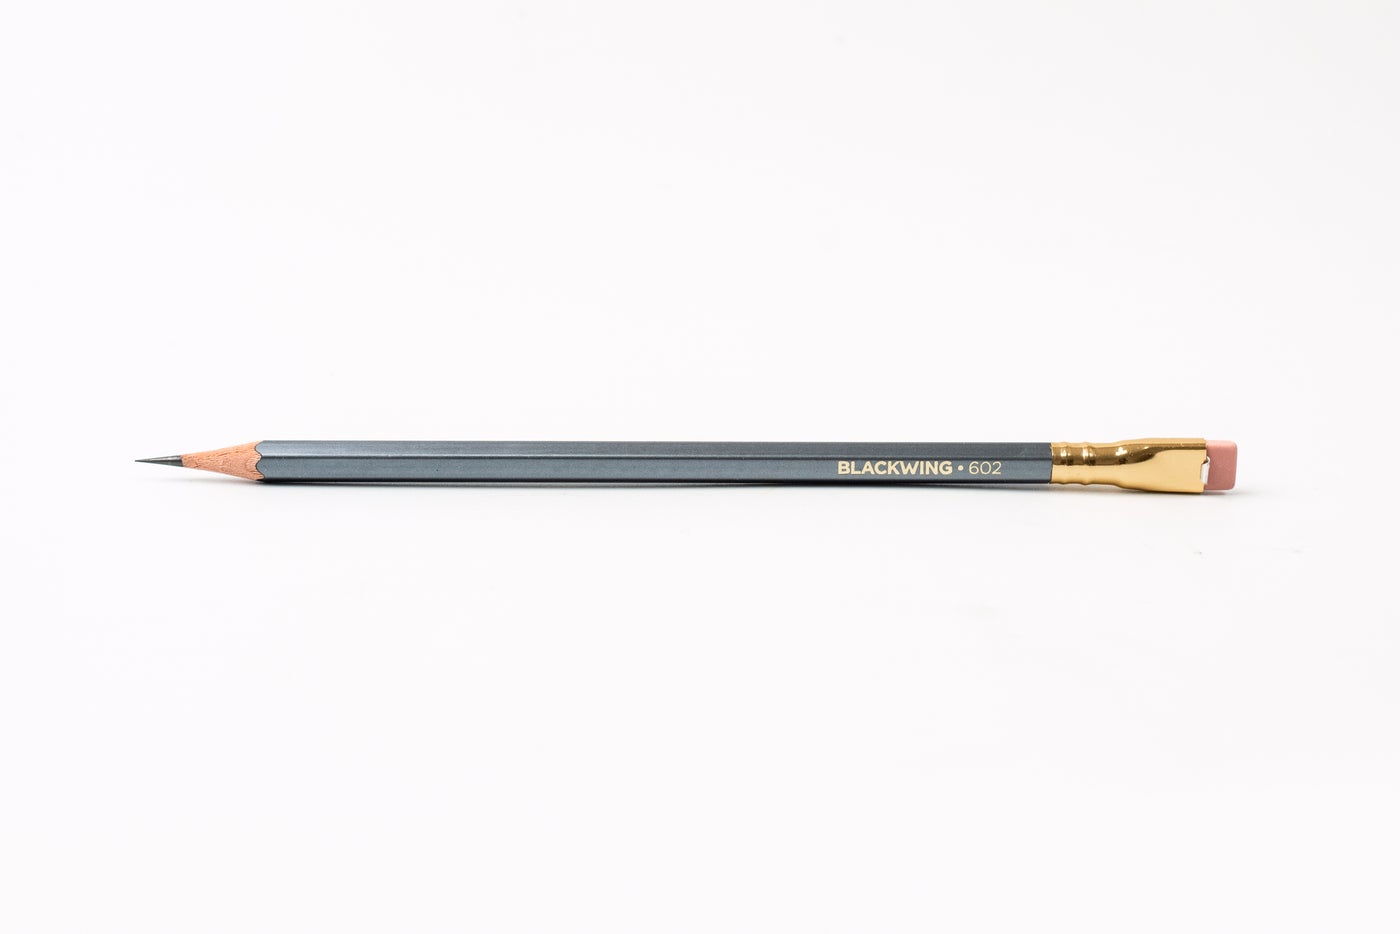 A box of Blackwing 602 pencils (Set of 12) with graphite core against a white background.